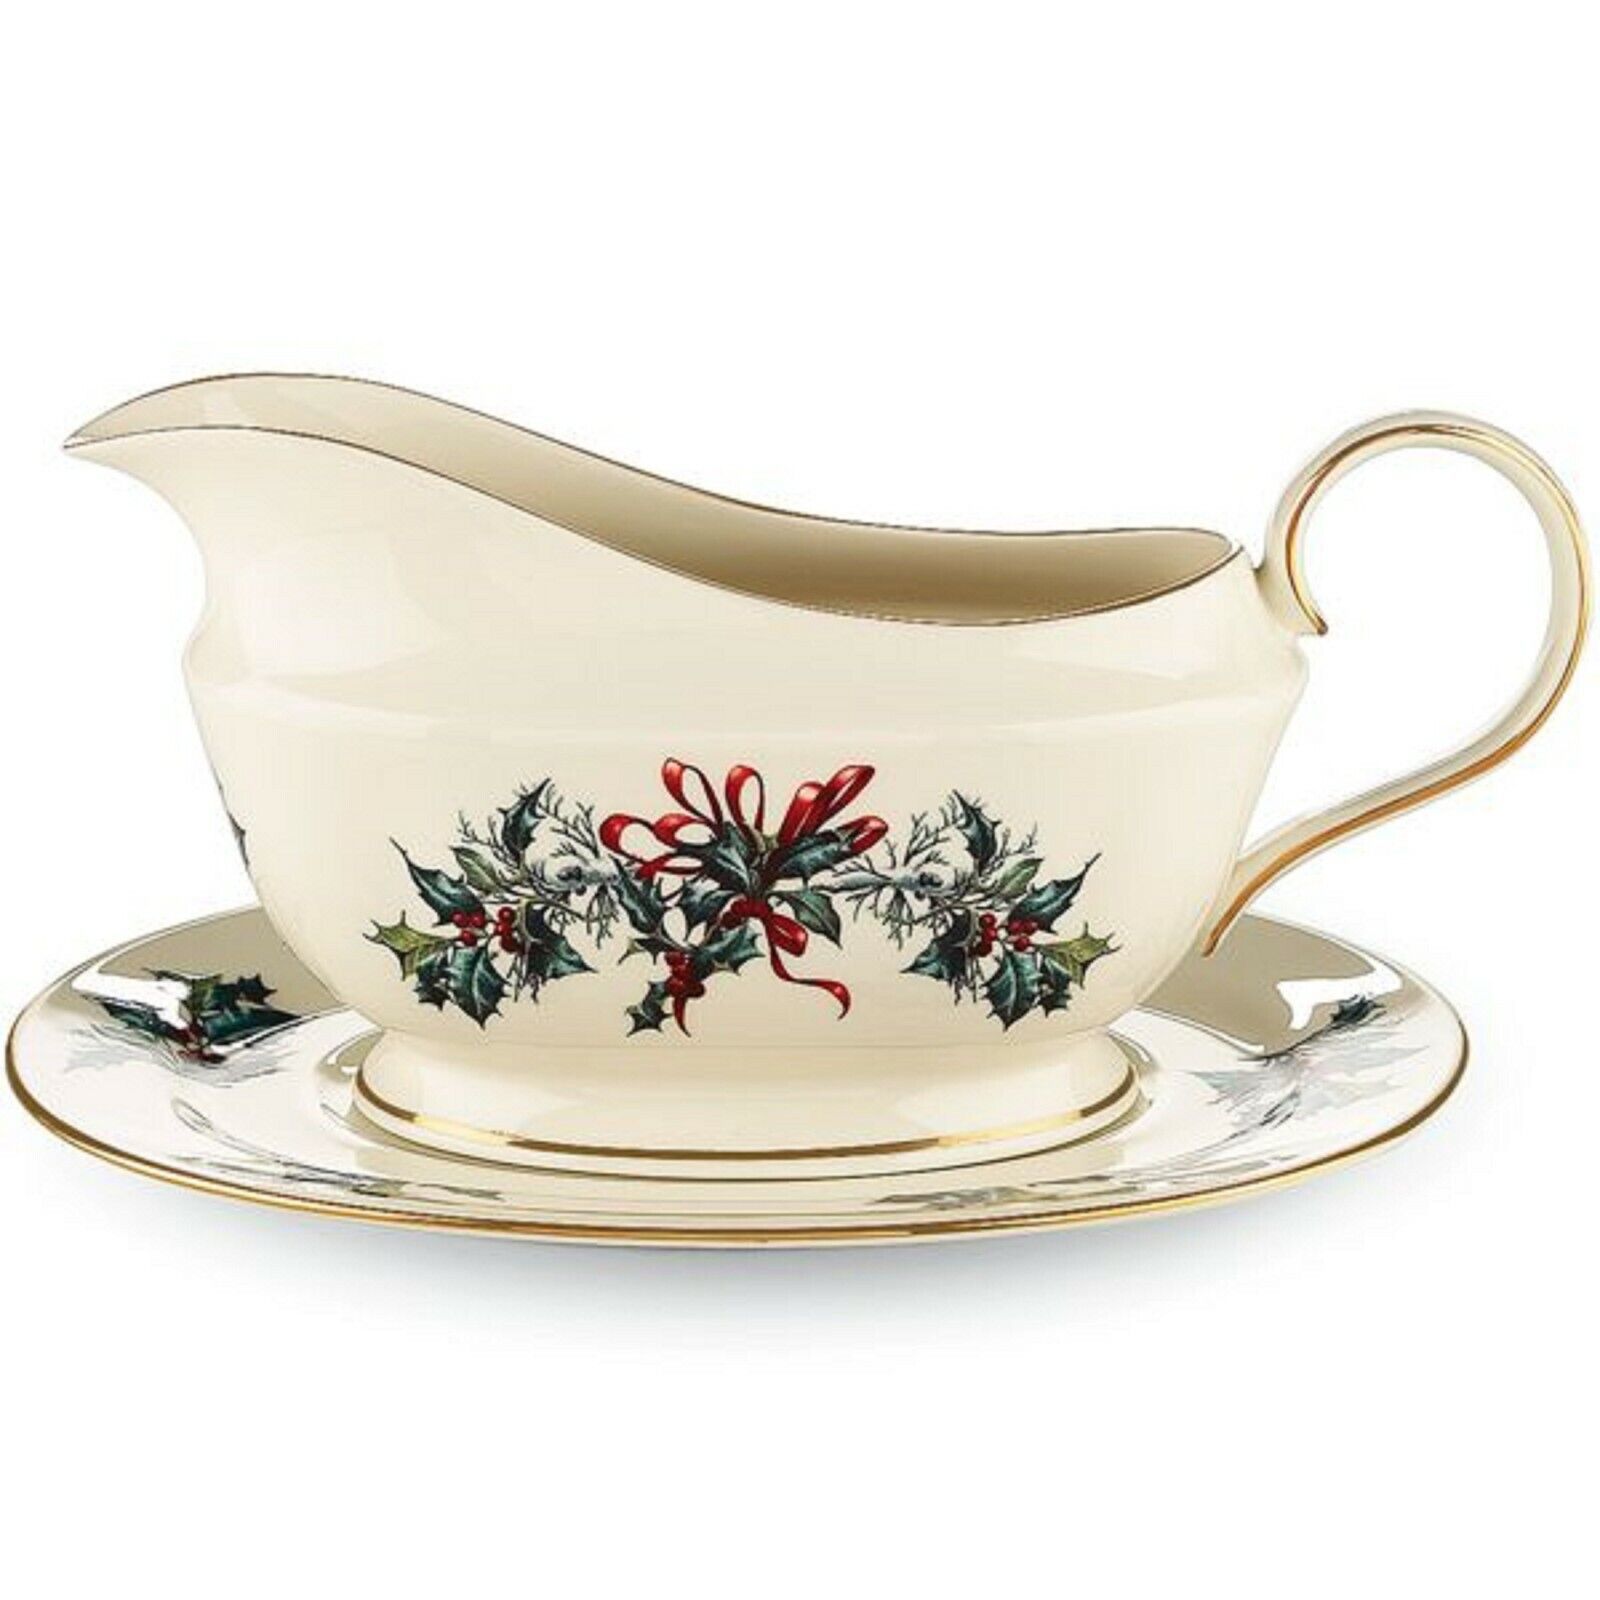 Primary image for Lenox Winter Greetings Gravy Boat & Stand 2 Piece Sauce Christmas USA NEW IN BOX